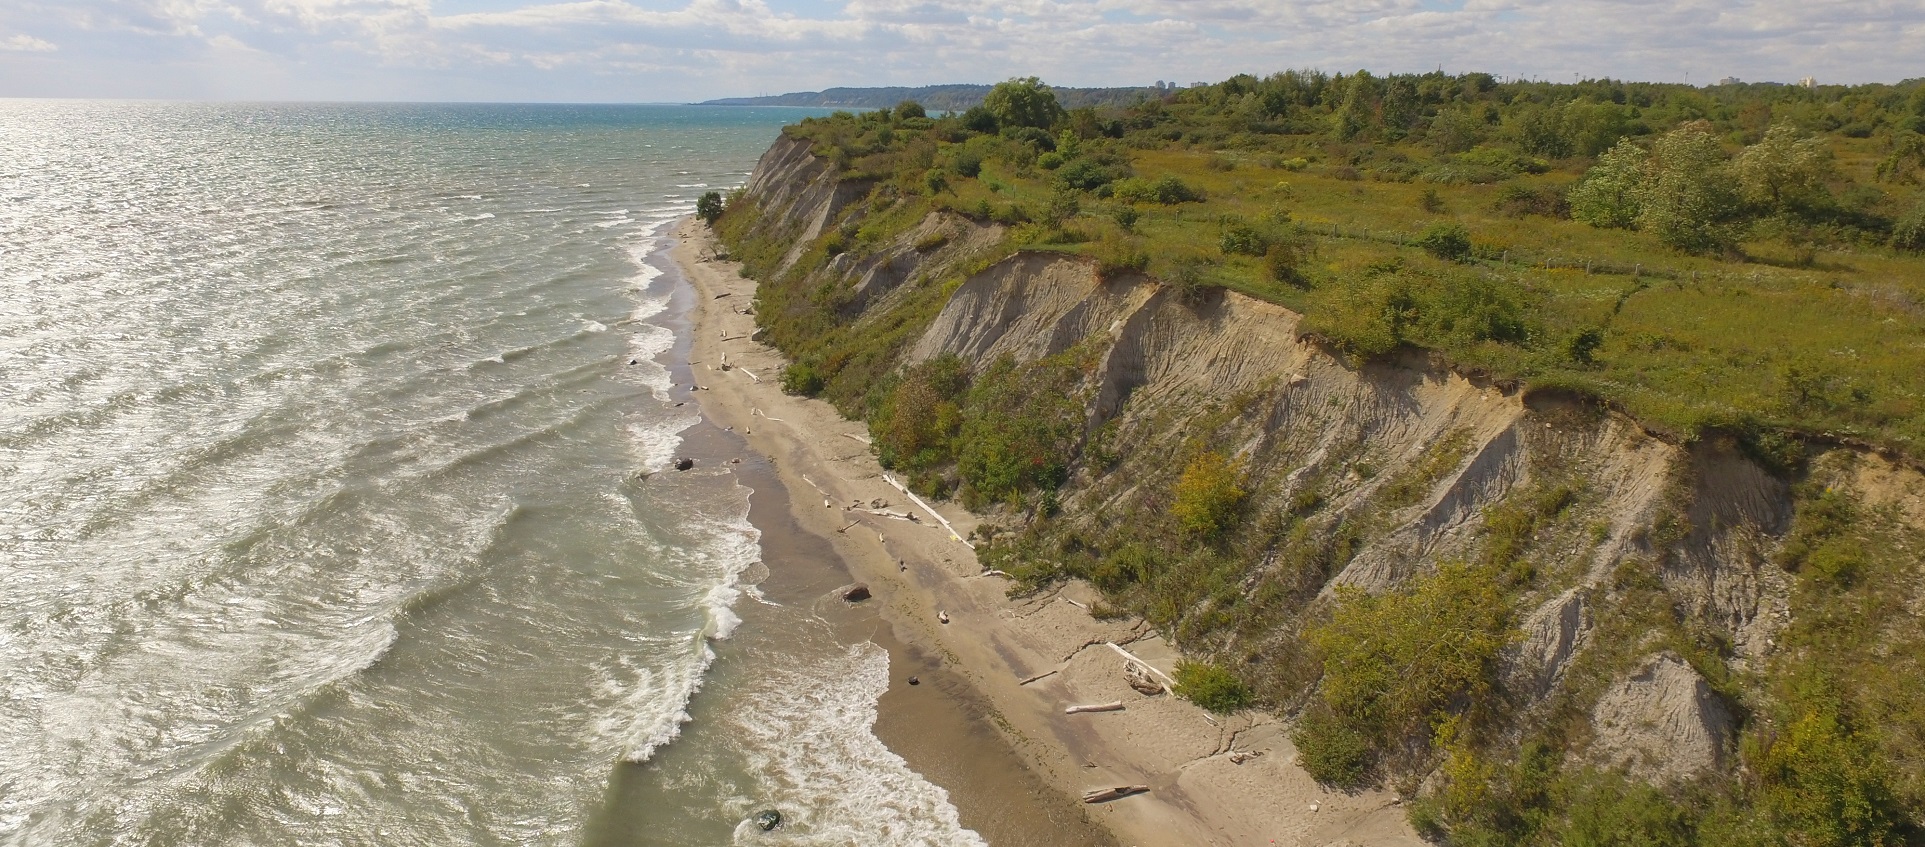 Scarborough Bluffs: Toronto’s Majestic Natural Wonderland Uncovered